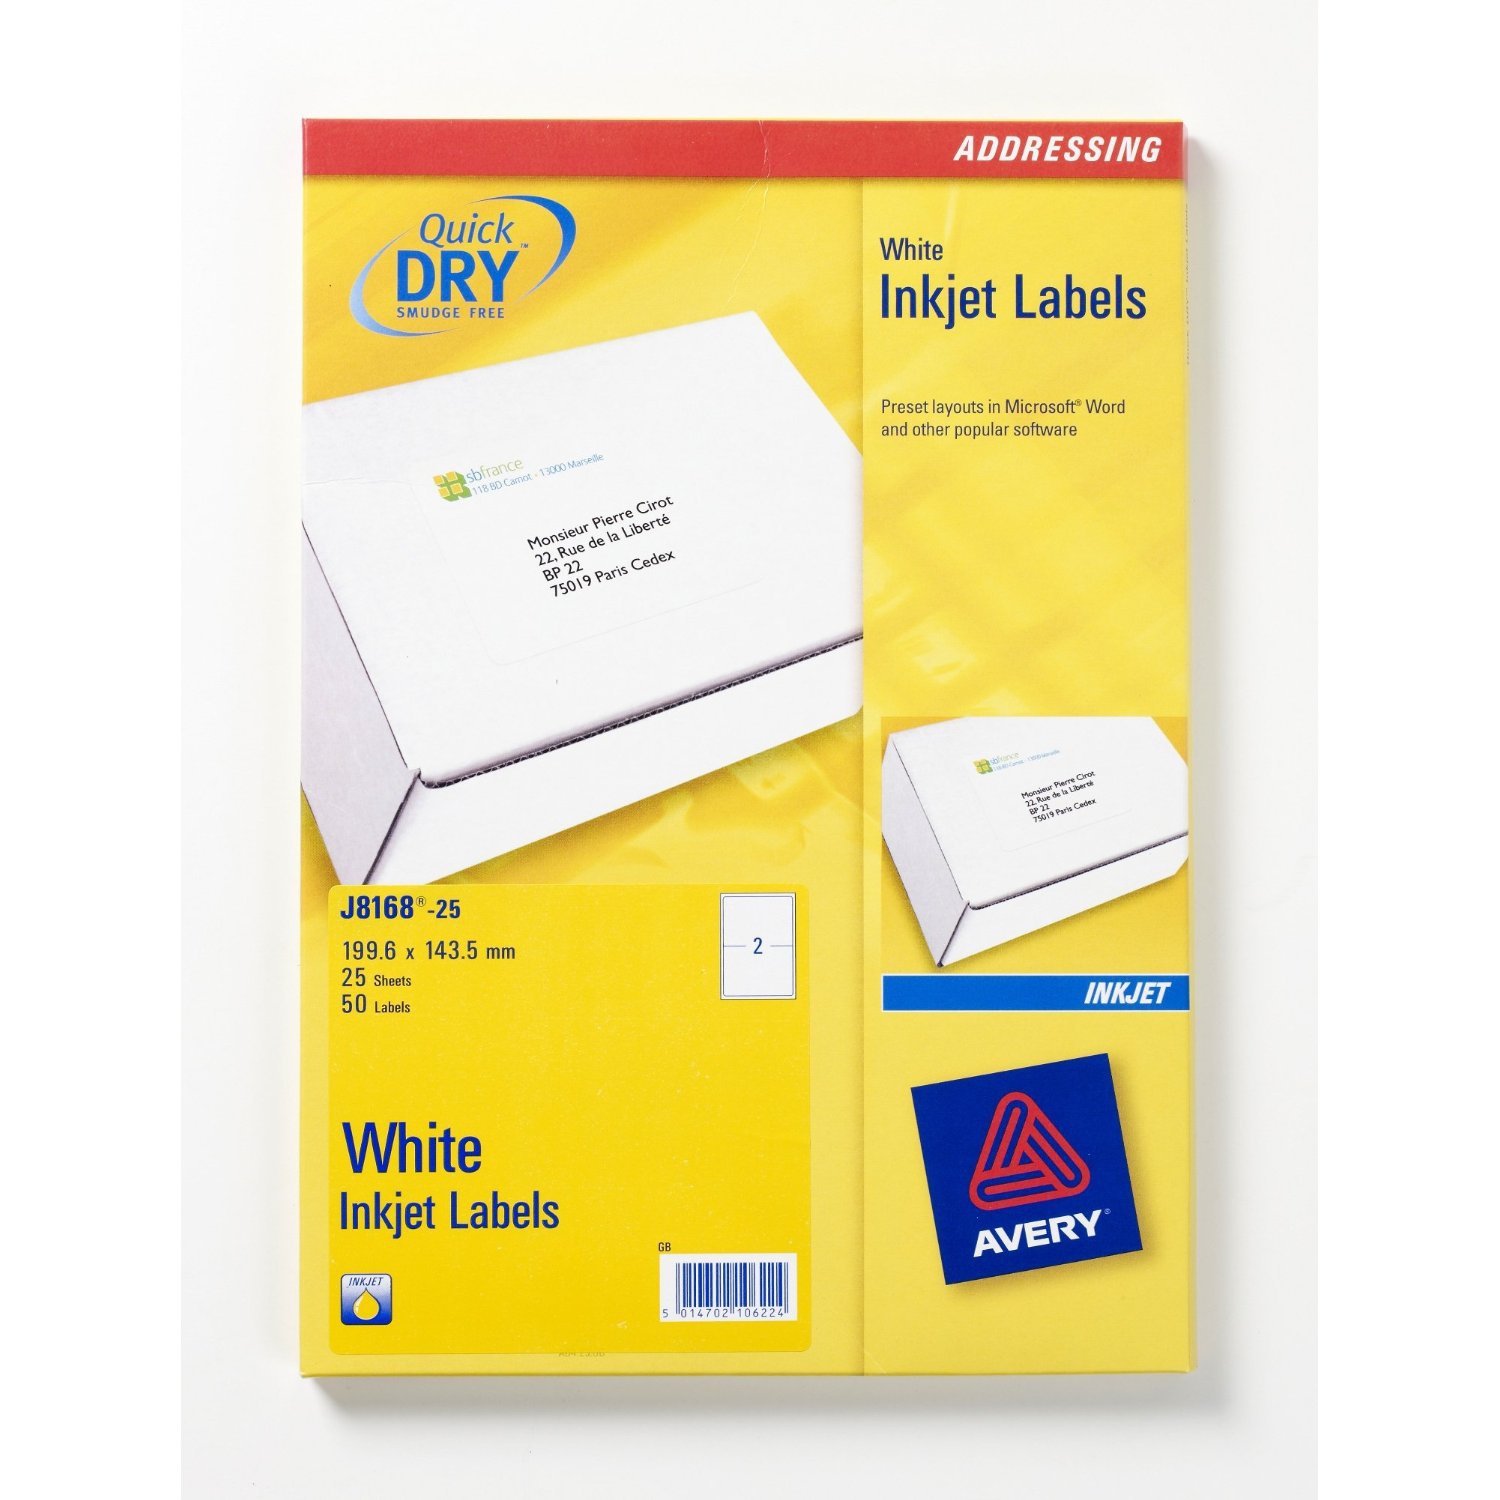 Photos - Other consumables Avery J8168-25 addressing label White